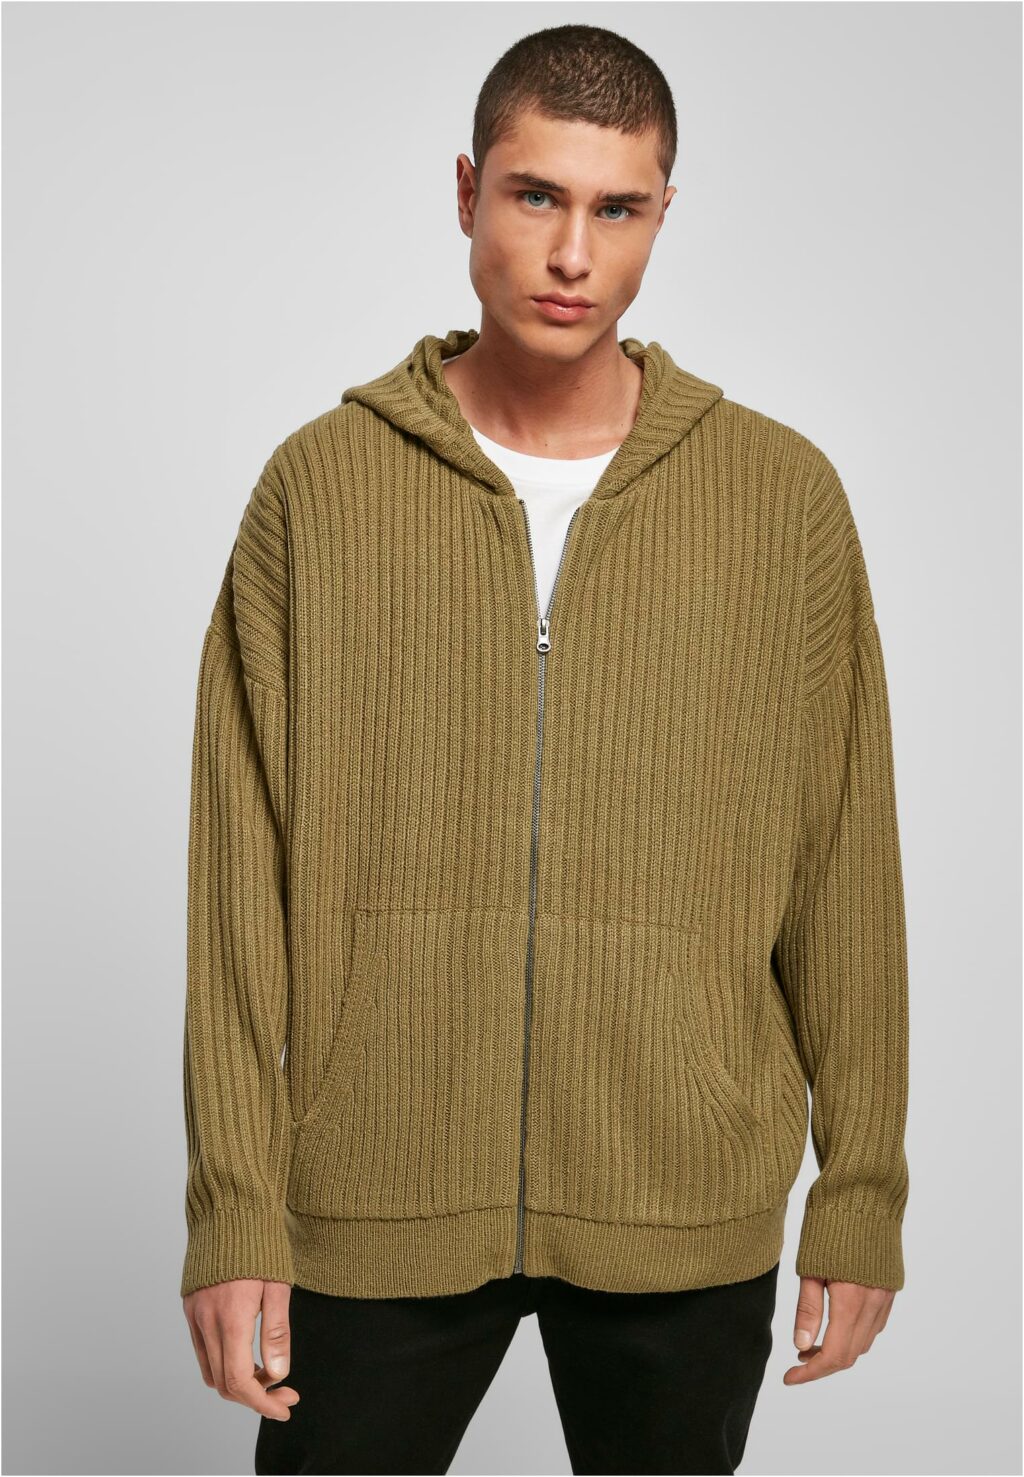 Urban Classics Knitted Zip Hoody tiniolive TB4678